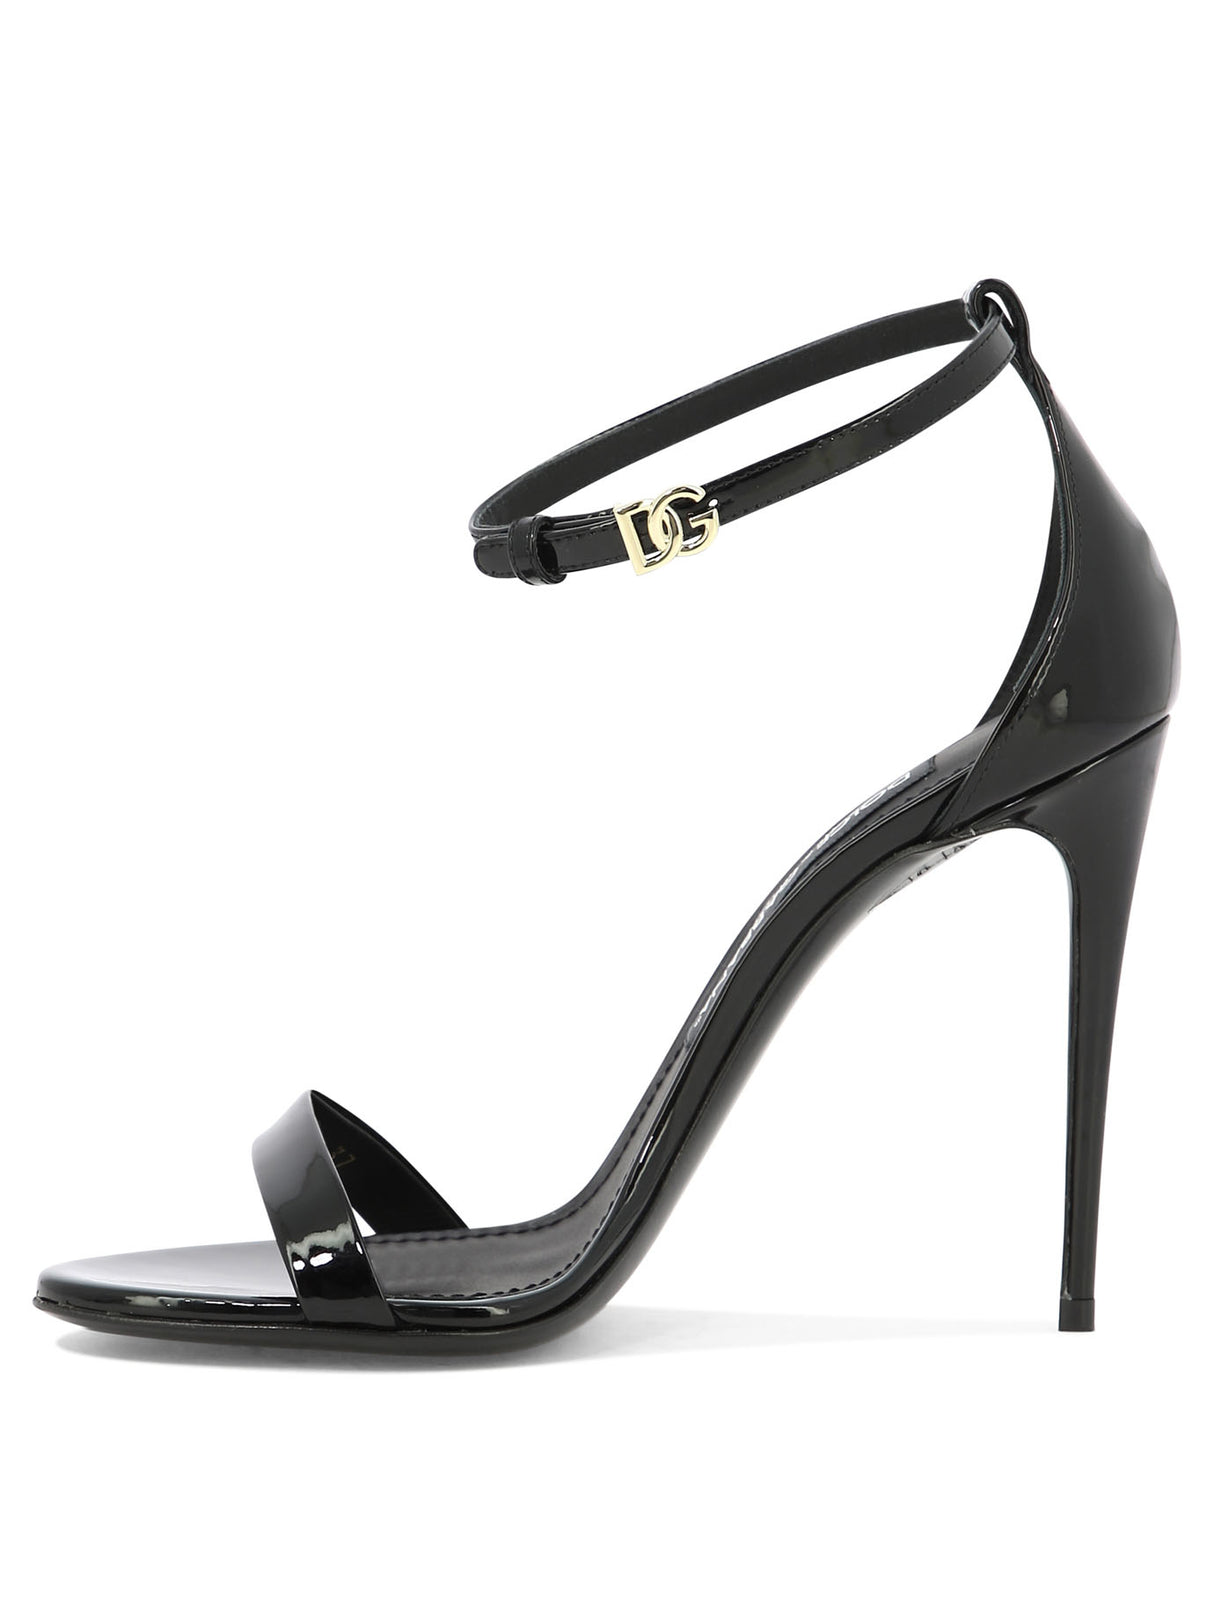 DOLCE & GABBANA Classic Black Patent Leather Sandals for Women